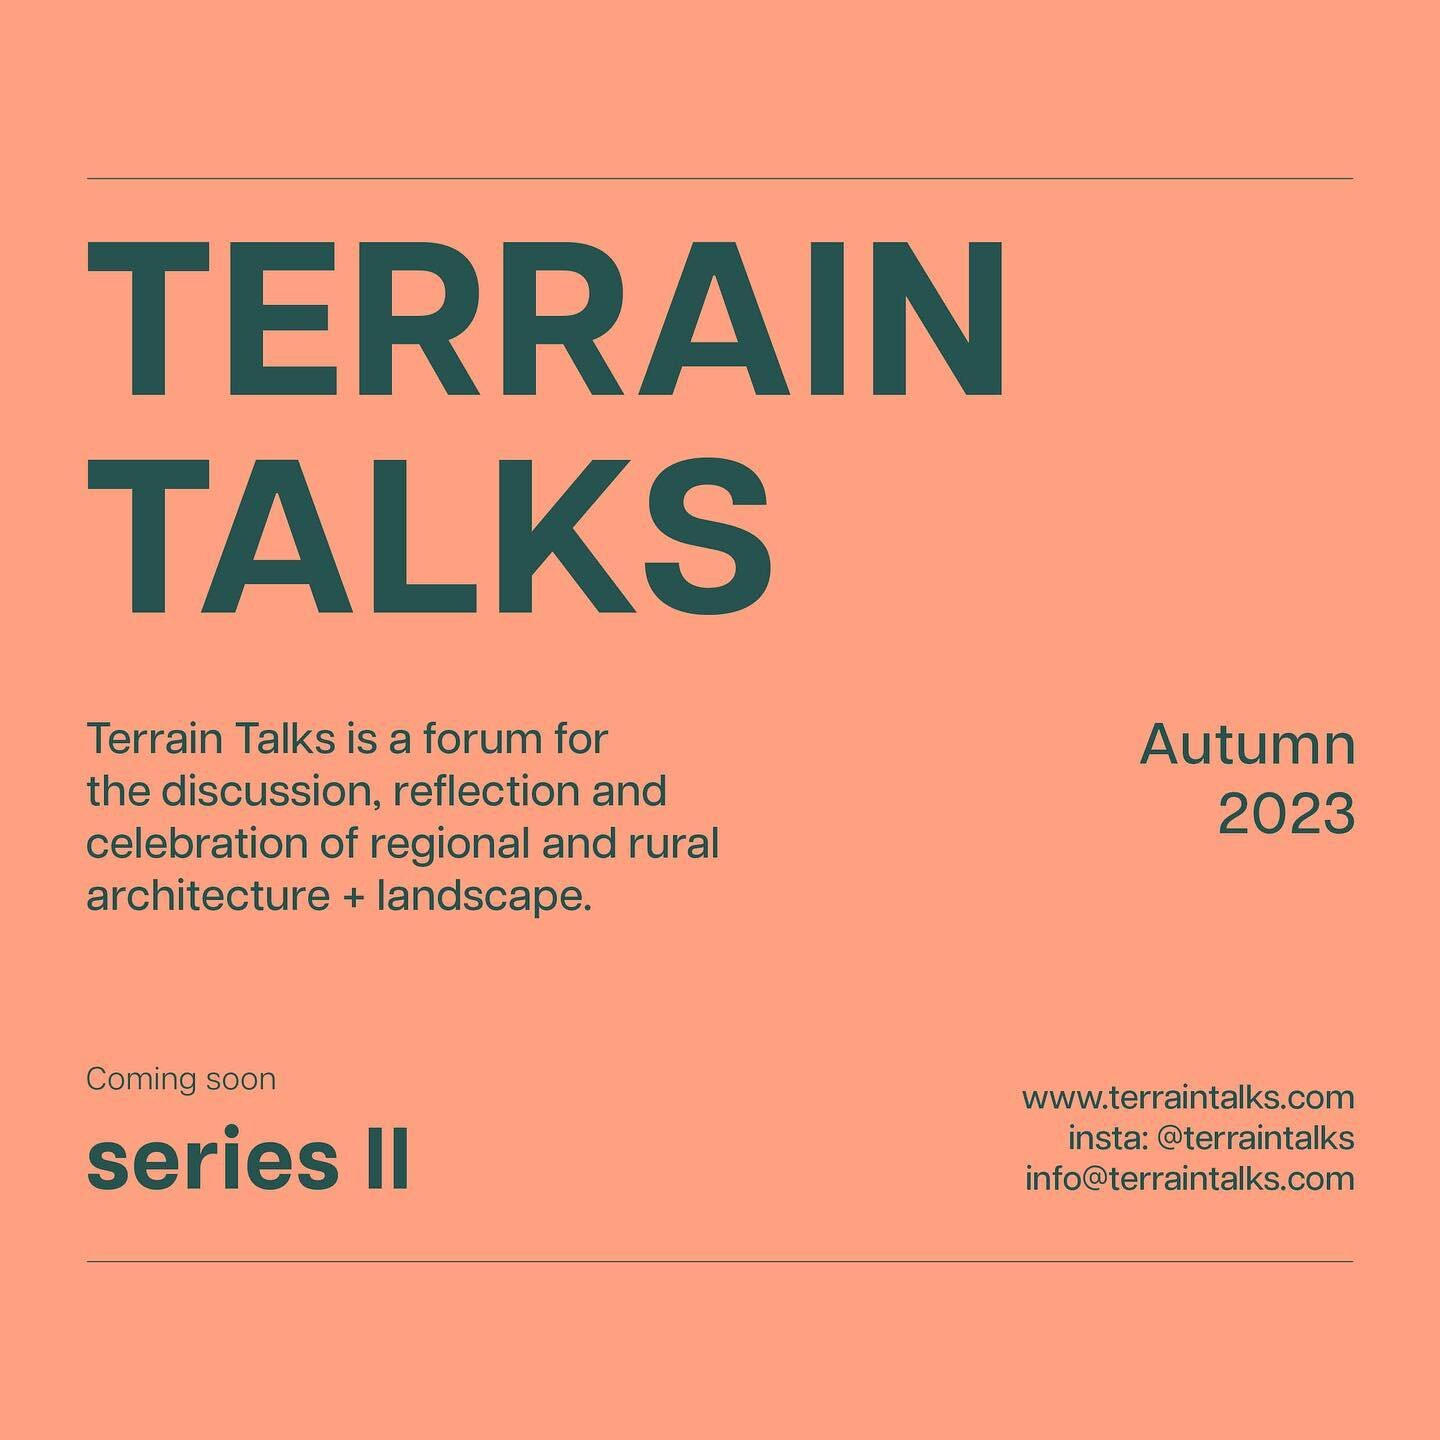 We&rsquo;re excited to announce Series II of TERRAIN Talks will be hosted in Autumn this year. Stay tuned for more information.

-

TERRAIN Talks was founded in 2022 as a forum for the discussion, reflection and celebration of regional and rural arch